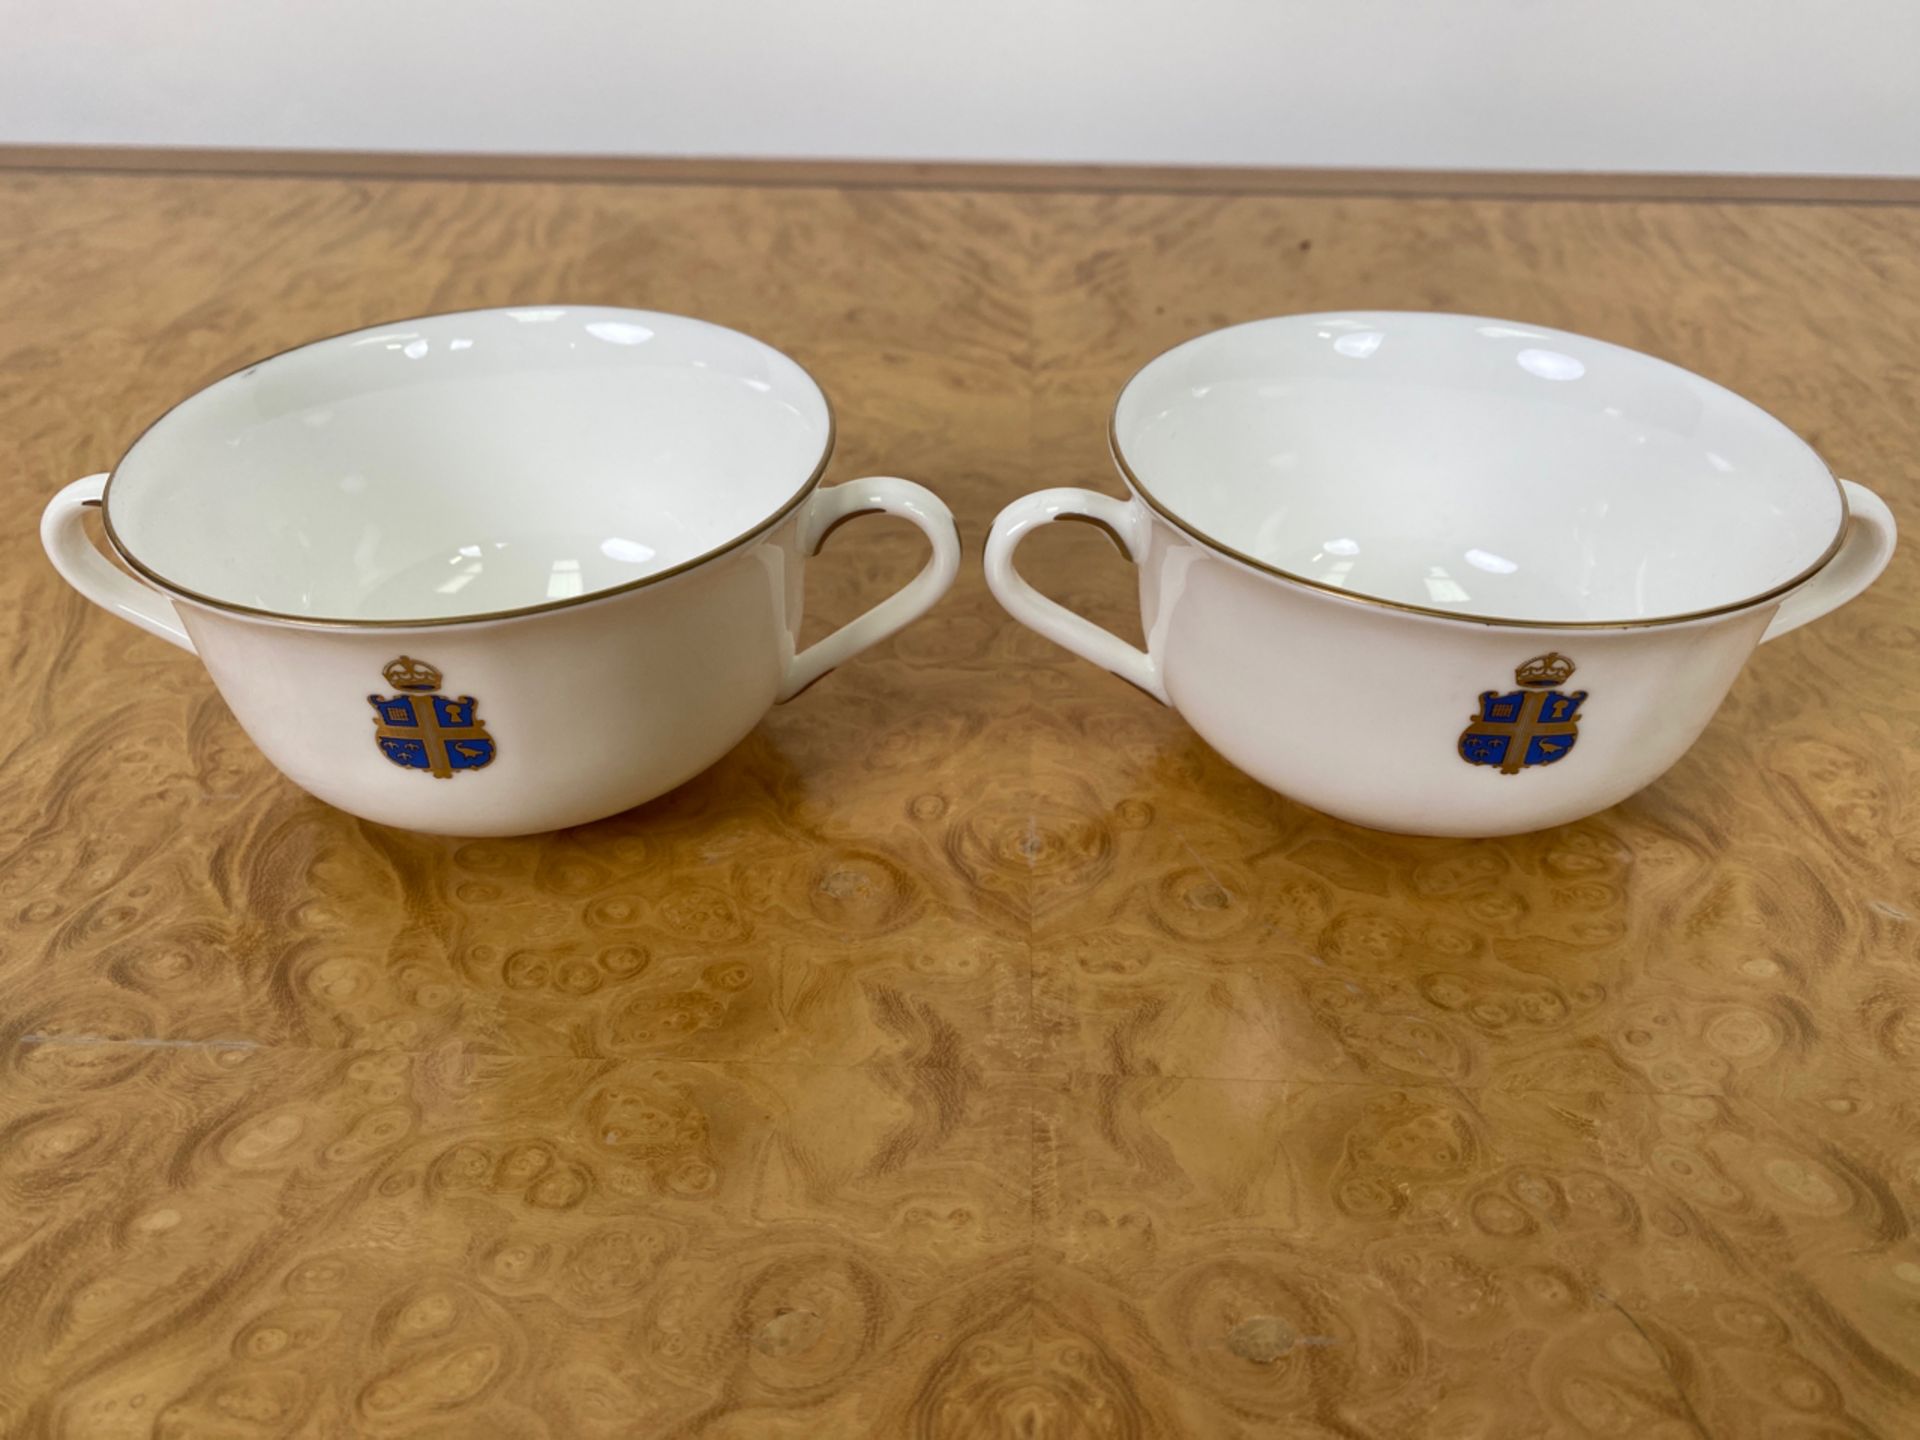 Set of Crested Crockery for Claridge's by Chommette 1884 - Image 30 of 31